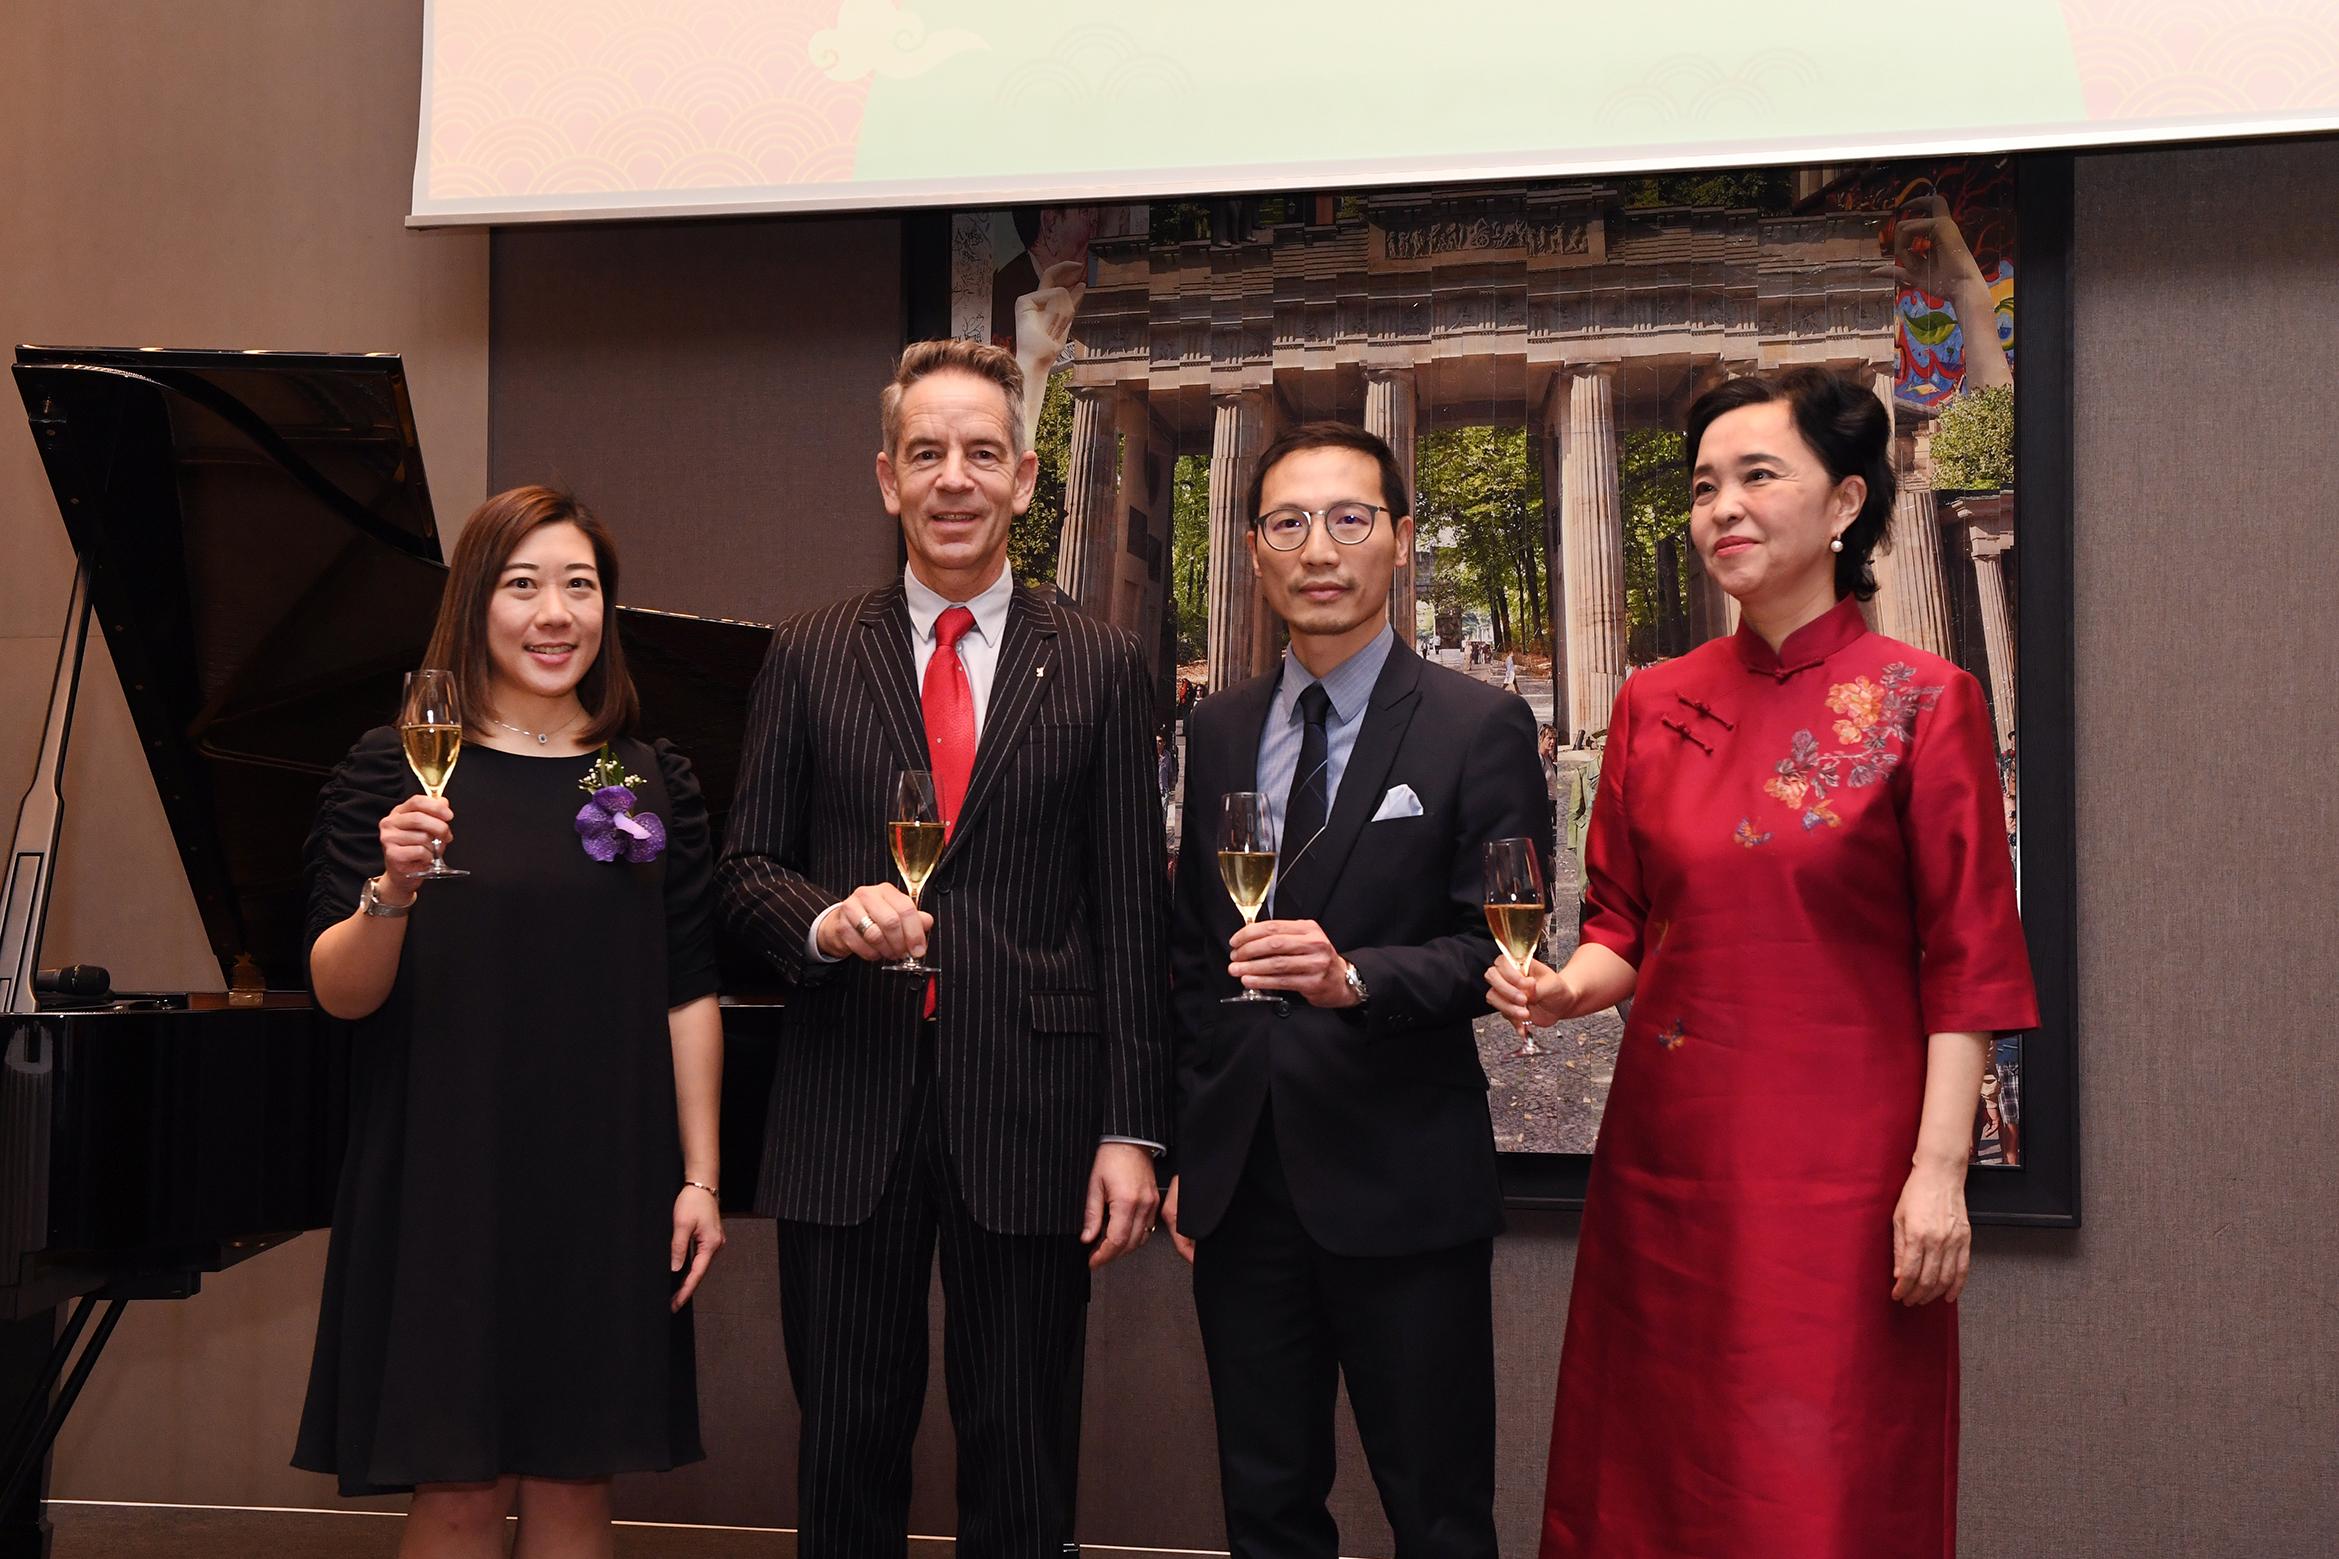 The Hong Kong Economic and Trade Office, Berlin (HKETO Berlin) welcomed friends and partners of Hong Kong to celebrate the Year of the Dragon with a reception held in Berlin, Germany on February 13 (Berlin time). Photo shows (from left) the Director of HKETO Berlin, Ms Jenny Szeto; the Head of Division for International Relations at the Senate Chancellery of Berlin, Dr Rainer Seider; the Regional Director, Europe, Central Asia & Israel of the Hong Kong Trade Development Council, Mr Silas Chu; and the Minister of the Chinese Embassy in Germany, Ms Zeng Yingru, at the toasting ceremony.